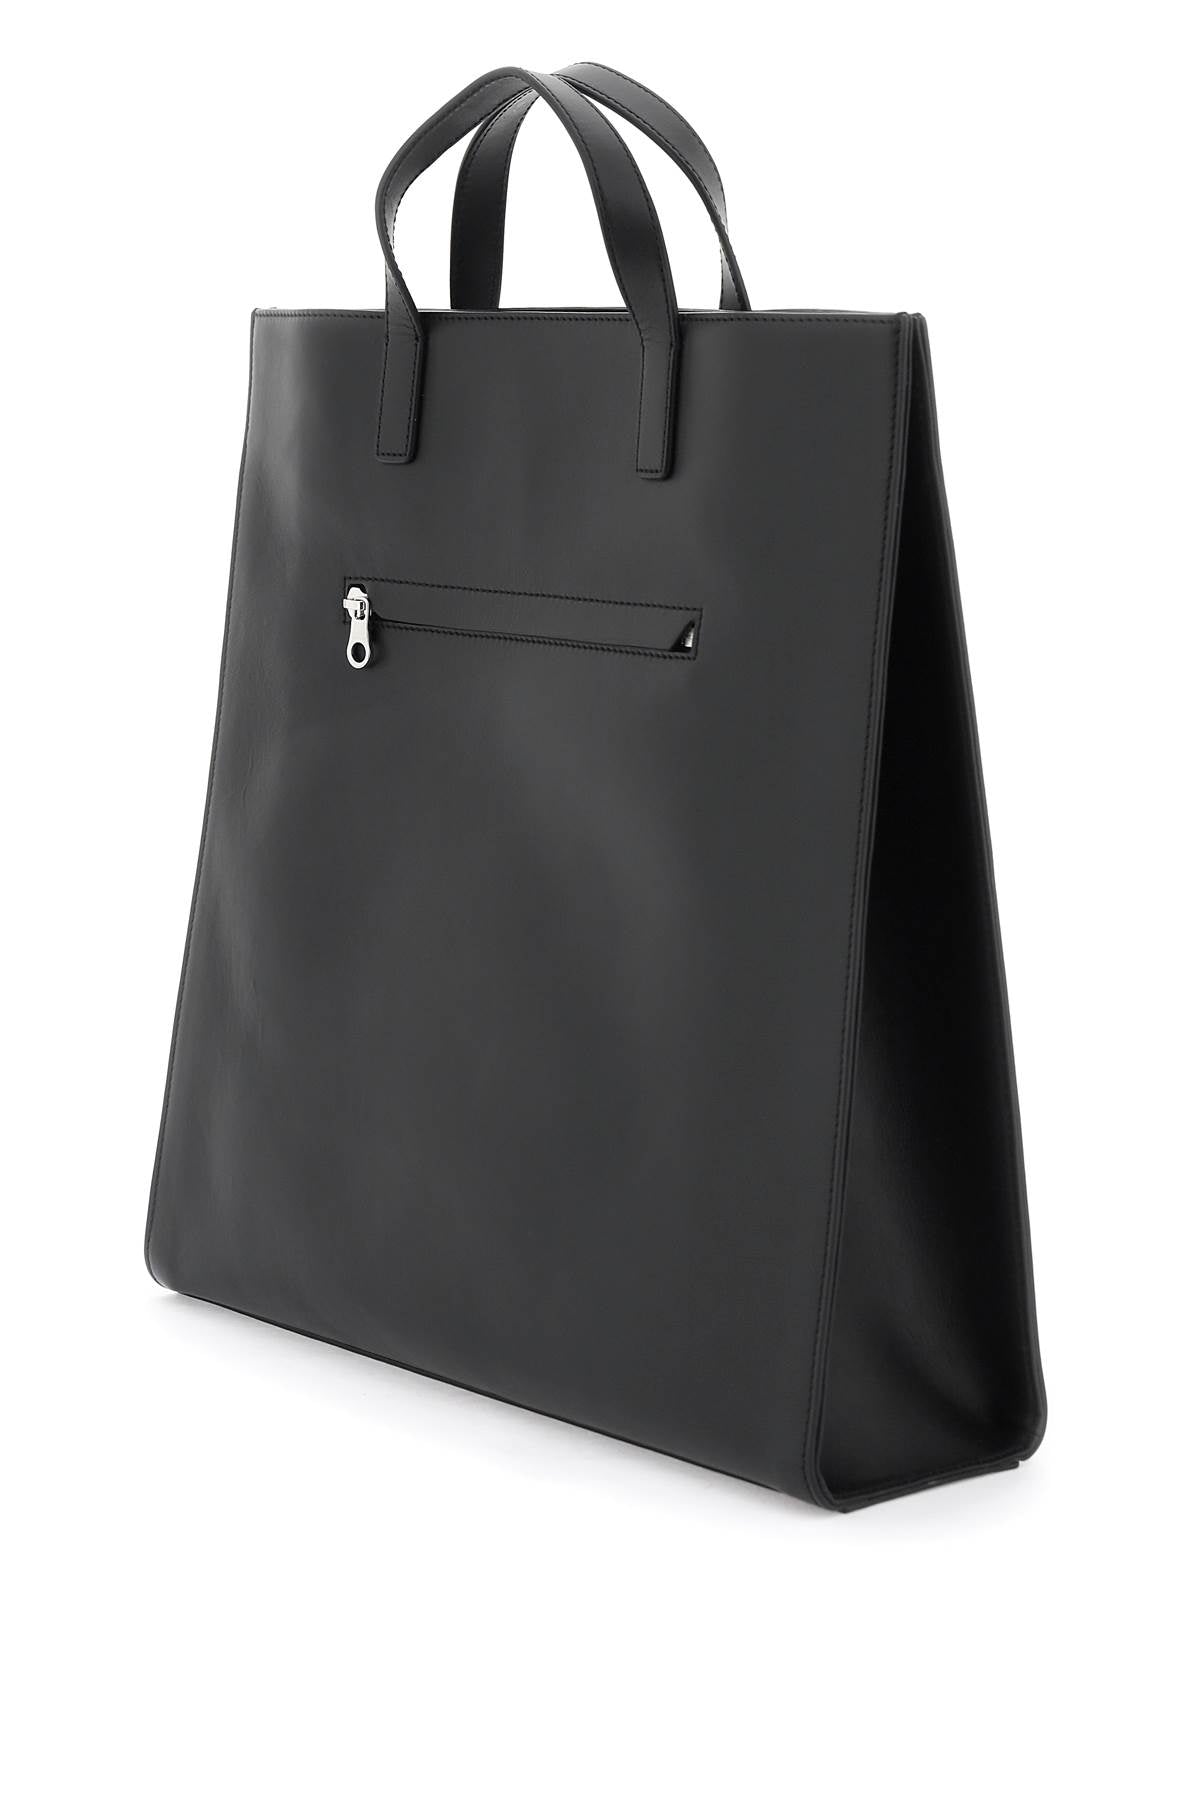 COURREGÈS Black Smooth Leather Heritage Tote Handbag for Women - SS24 Collection